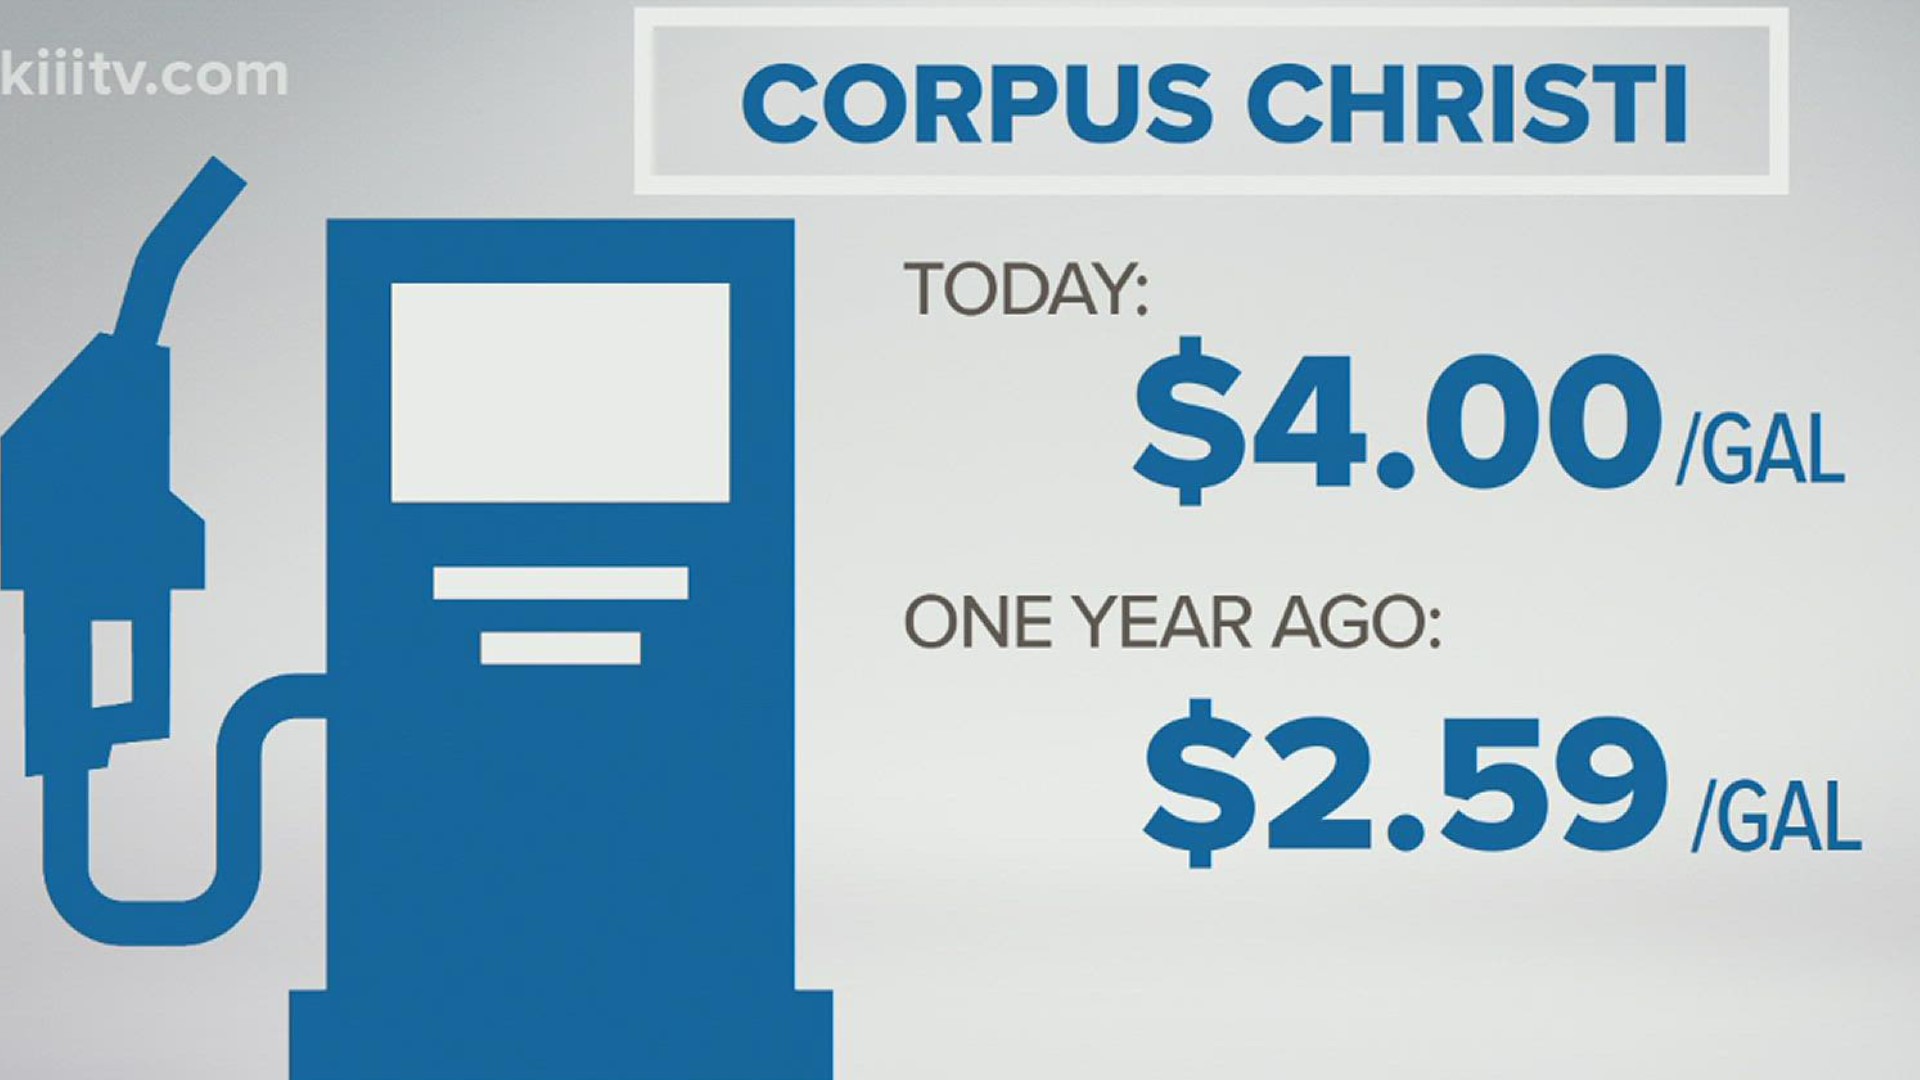 Corpus Christi residents are now paying an average of $4 a gallon for regular unleaded gas.